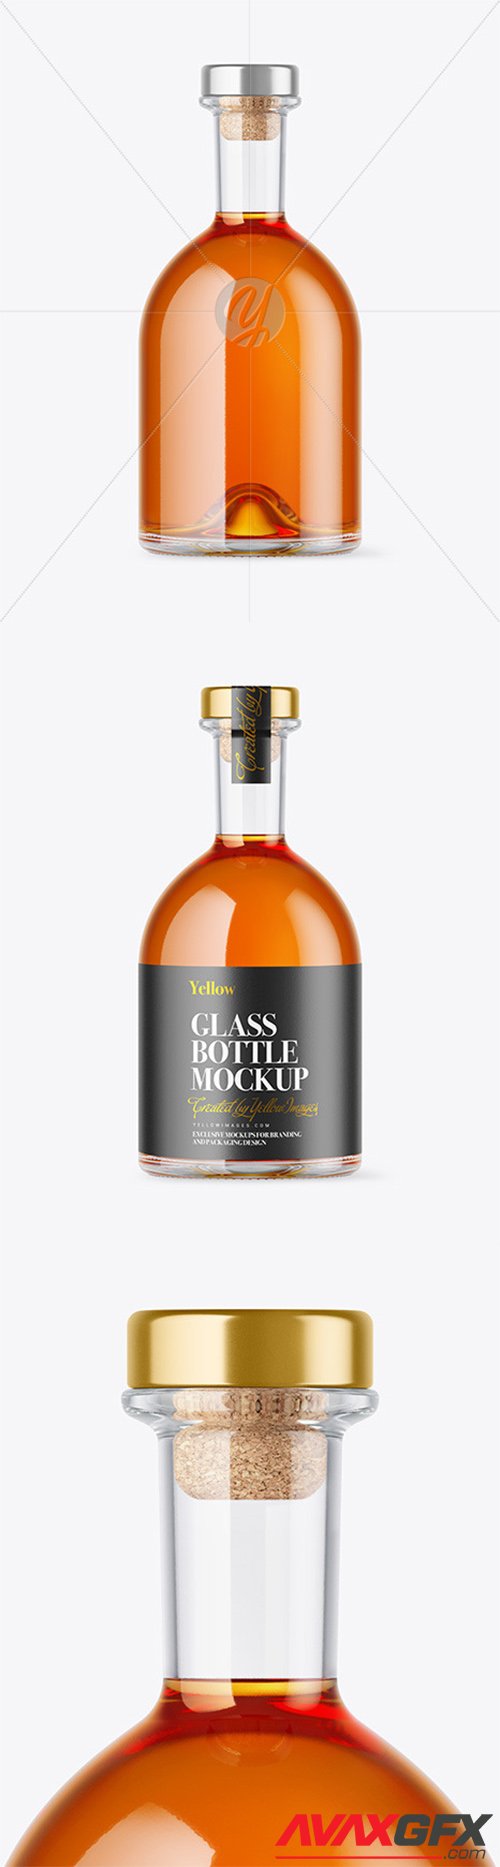 Whiskey Bottle with Wooden Cap Mockup 79689